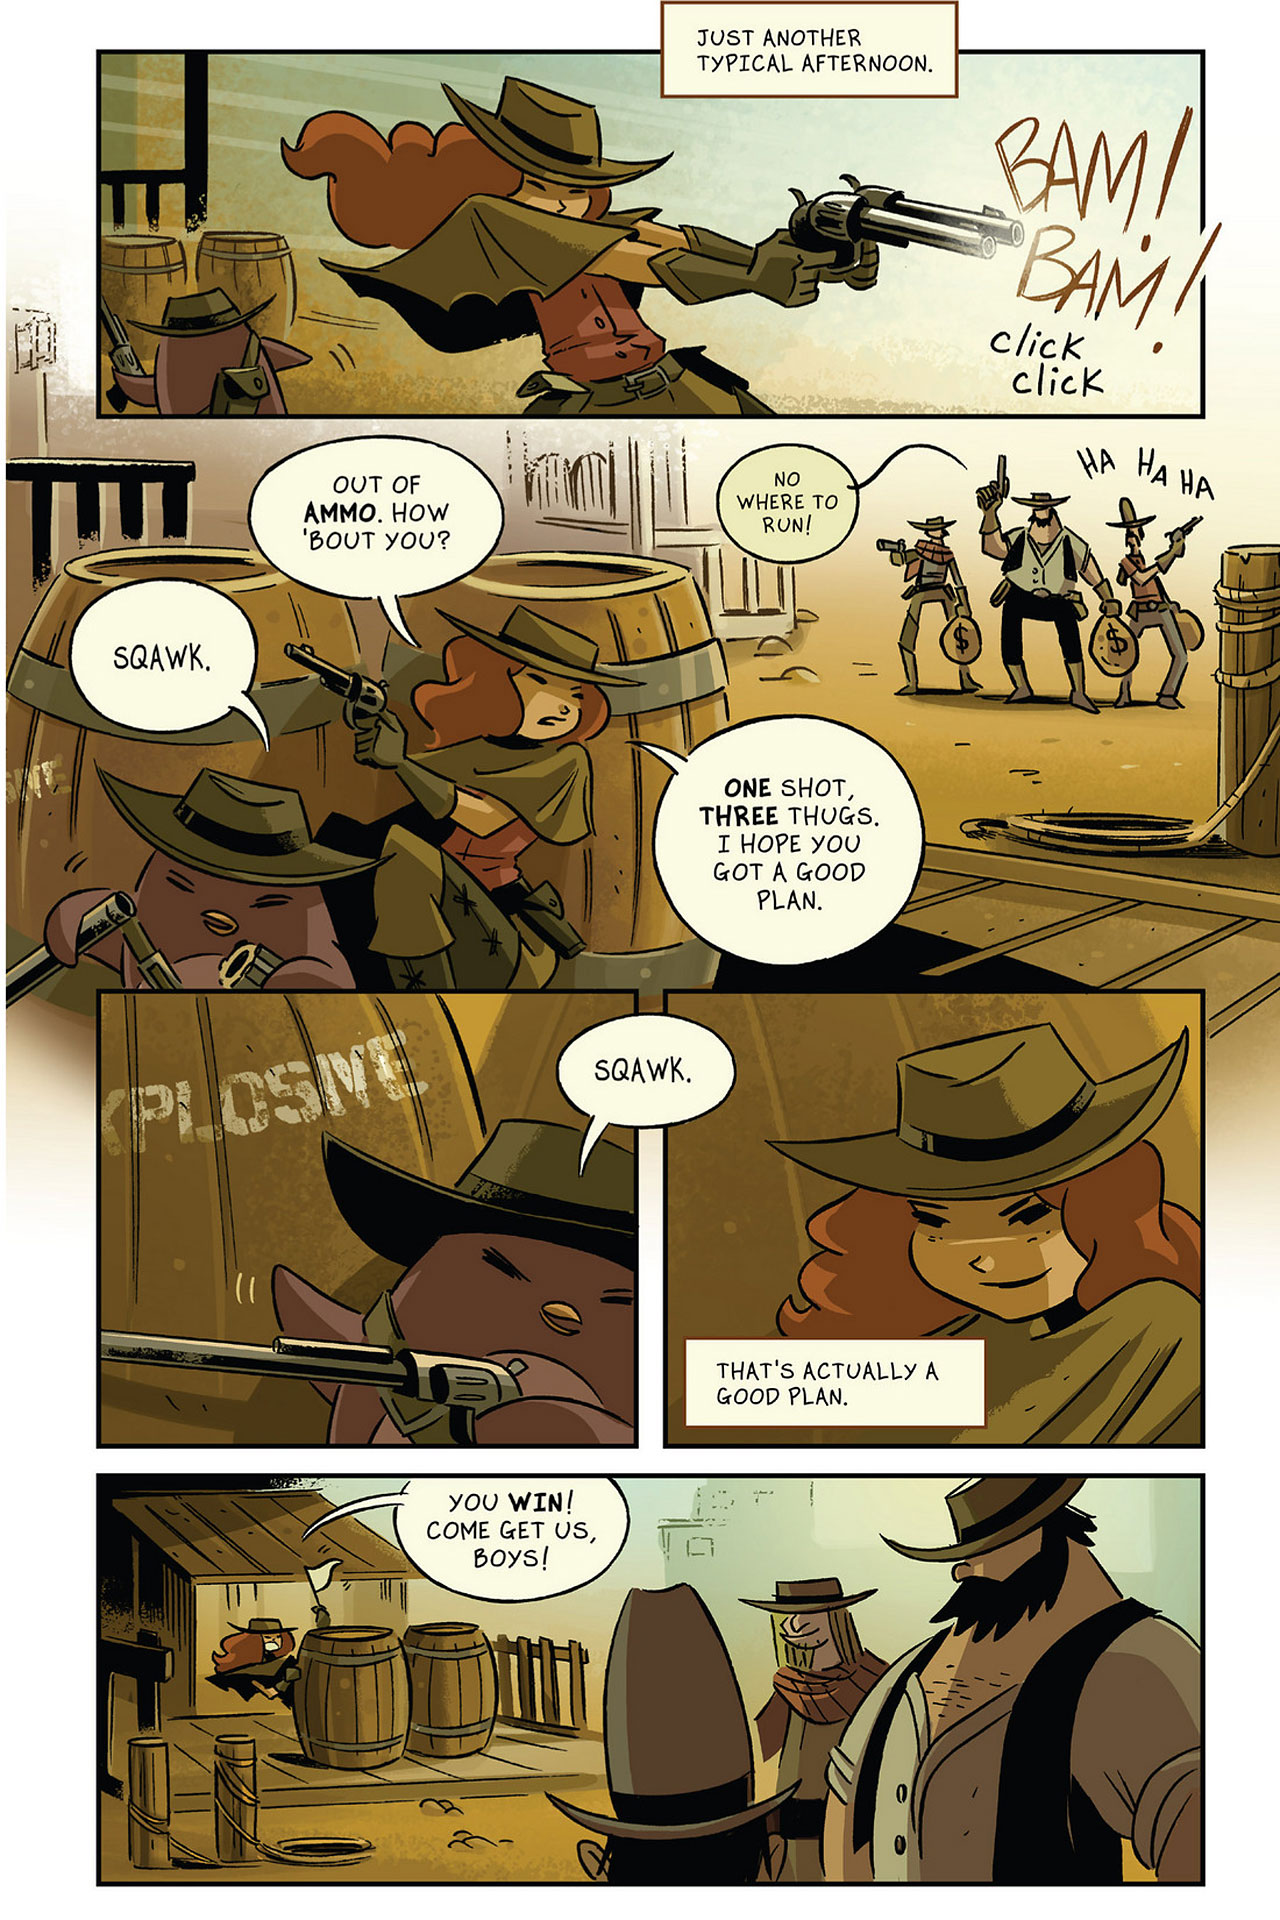 Read online Cow Boy comic -  Issue #5 - 17